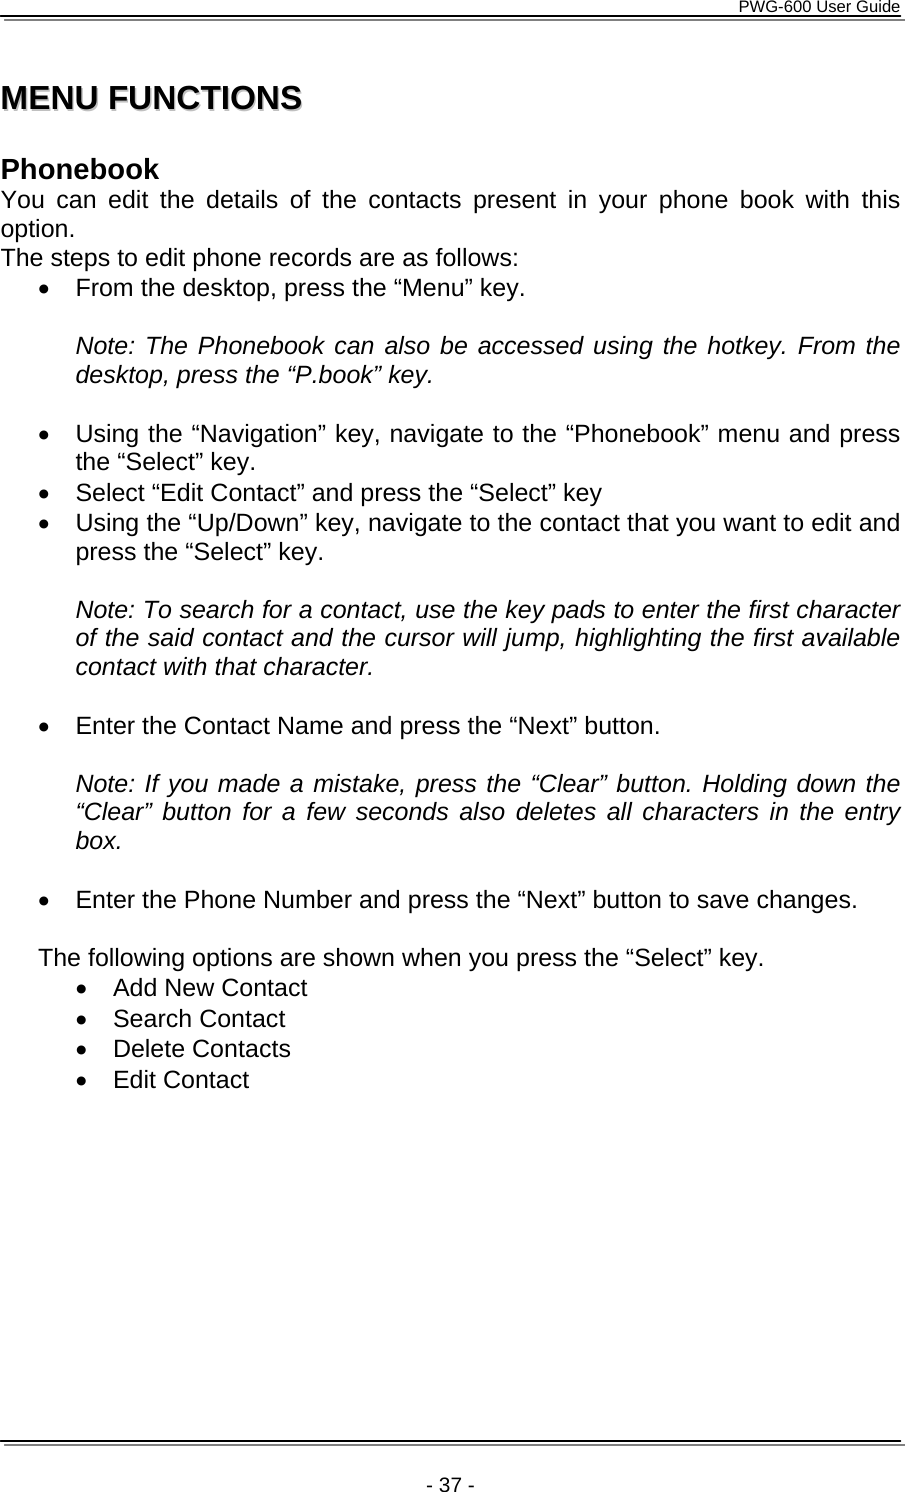      PWG-600 User Guide    - 37 - MMEENNUU  FFUUNNCCTTIIOONNSS   Phonebook You can edit the details of the contacts present in your phone book with this option. The steps to edit phone records are as follows: •  From the desktop, press the “Menu” key.  Note: The Phonebook can also be accessed using the hotkey. From the desktop, press the “P.book” key.  •  Using the “Navigation” key, navigate to the “Phonebook” menu and press the “Select” key. •  Select “Edit Contact” and press the “Select” key •  Using the “Up/Down” key, navigate to the contact that you want to edit and press the “Select” key.  Note: To search for a contact, use the key pads to enter the first character of the said contact and the cursor will jump, highlighting the first available contact with that character.  •  Enter the Contact Name and press the “Next” button.   Note: If you made a mistake, press the “Clear” button. Holding down the “Clear” button for a few seconds also deletes all characters in the entry box.   •  Enter the Phone Number and press the “Next” button to save changes.  The following options are shown when you press the “Select” key. •  Add New Contact • Search Contact • Delete Contacts • Edit Contact  